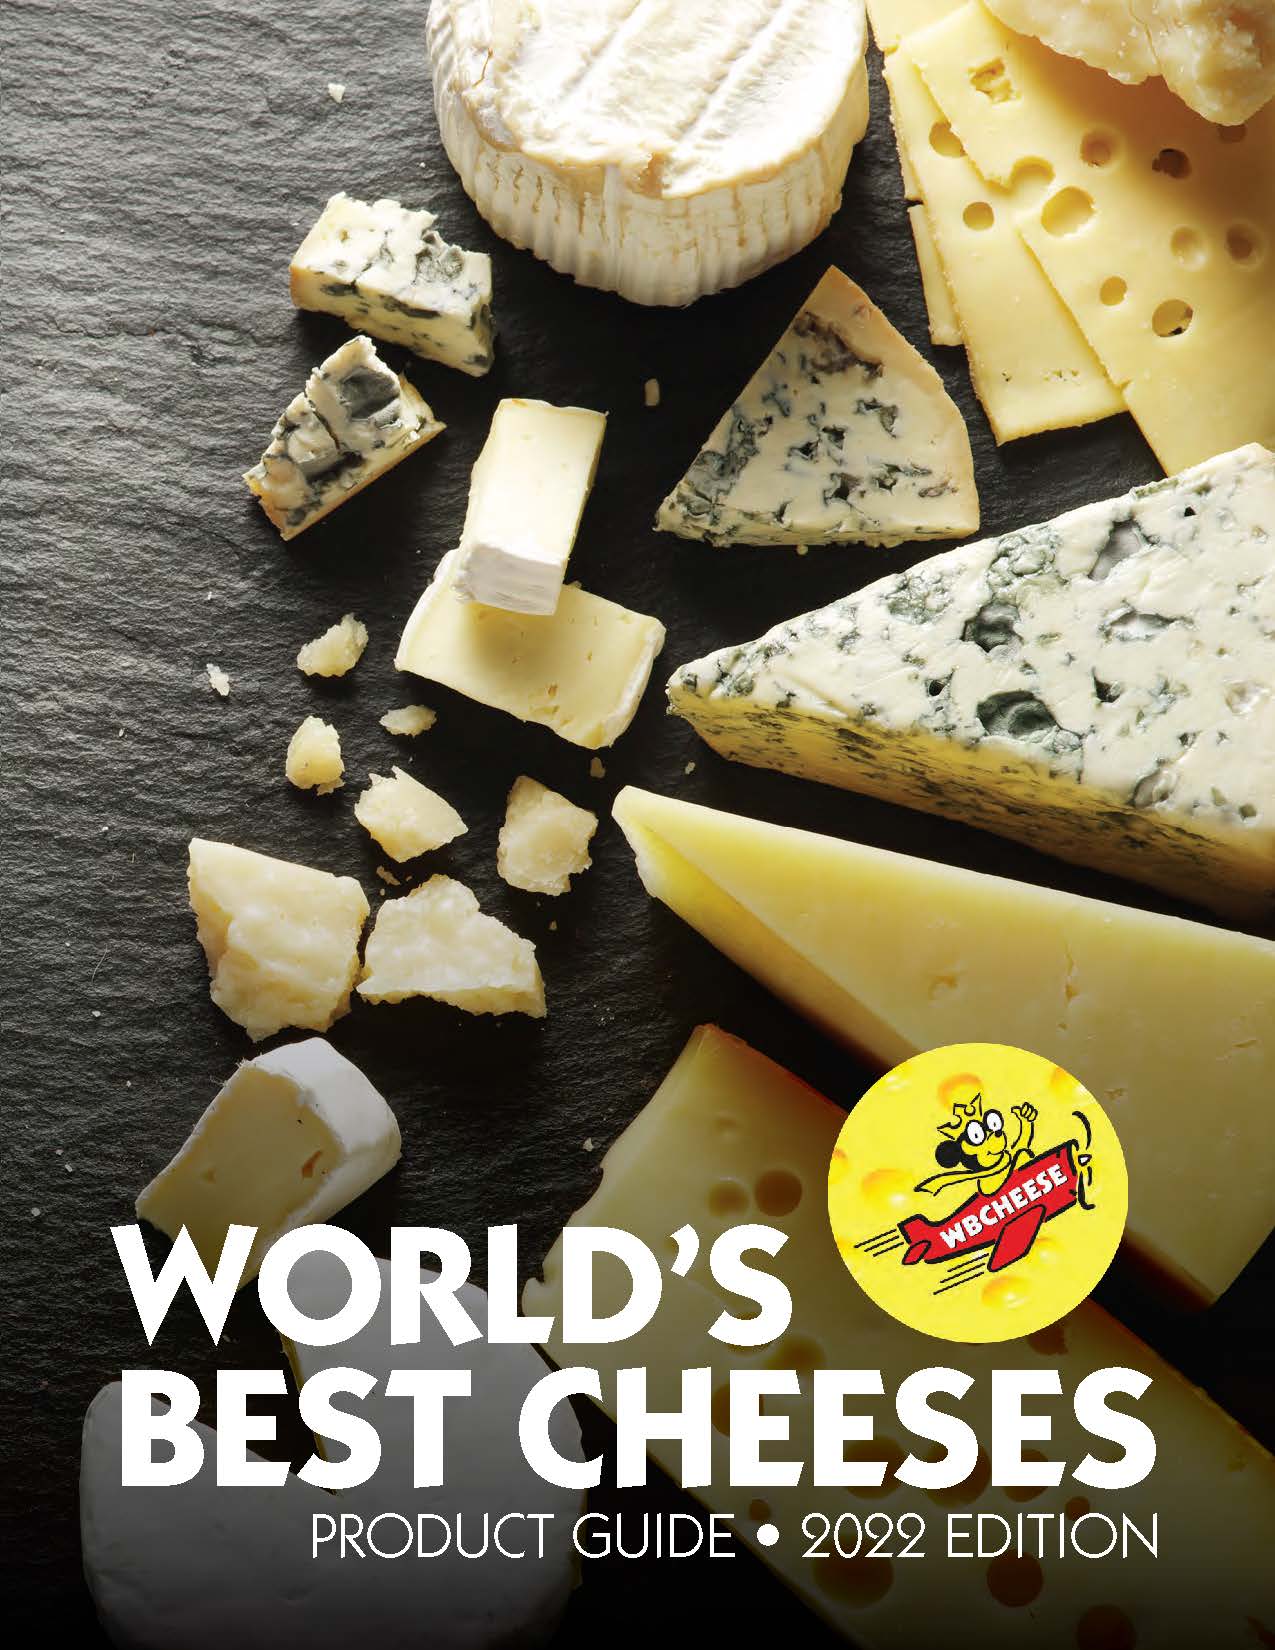 World's Best Cheeses Product Guide